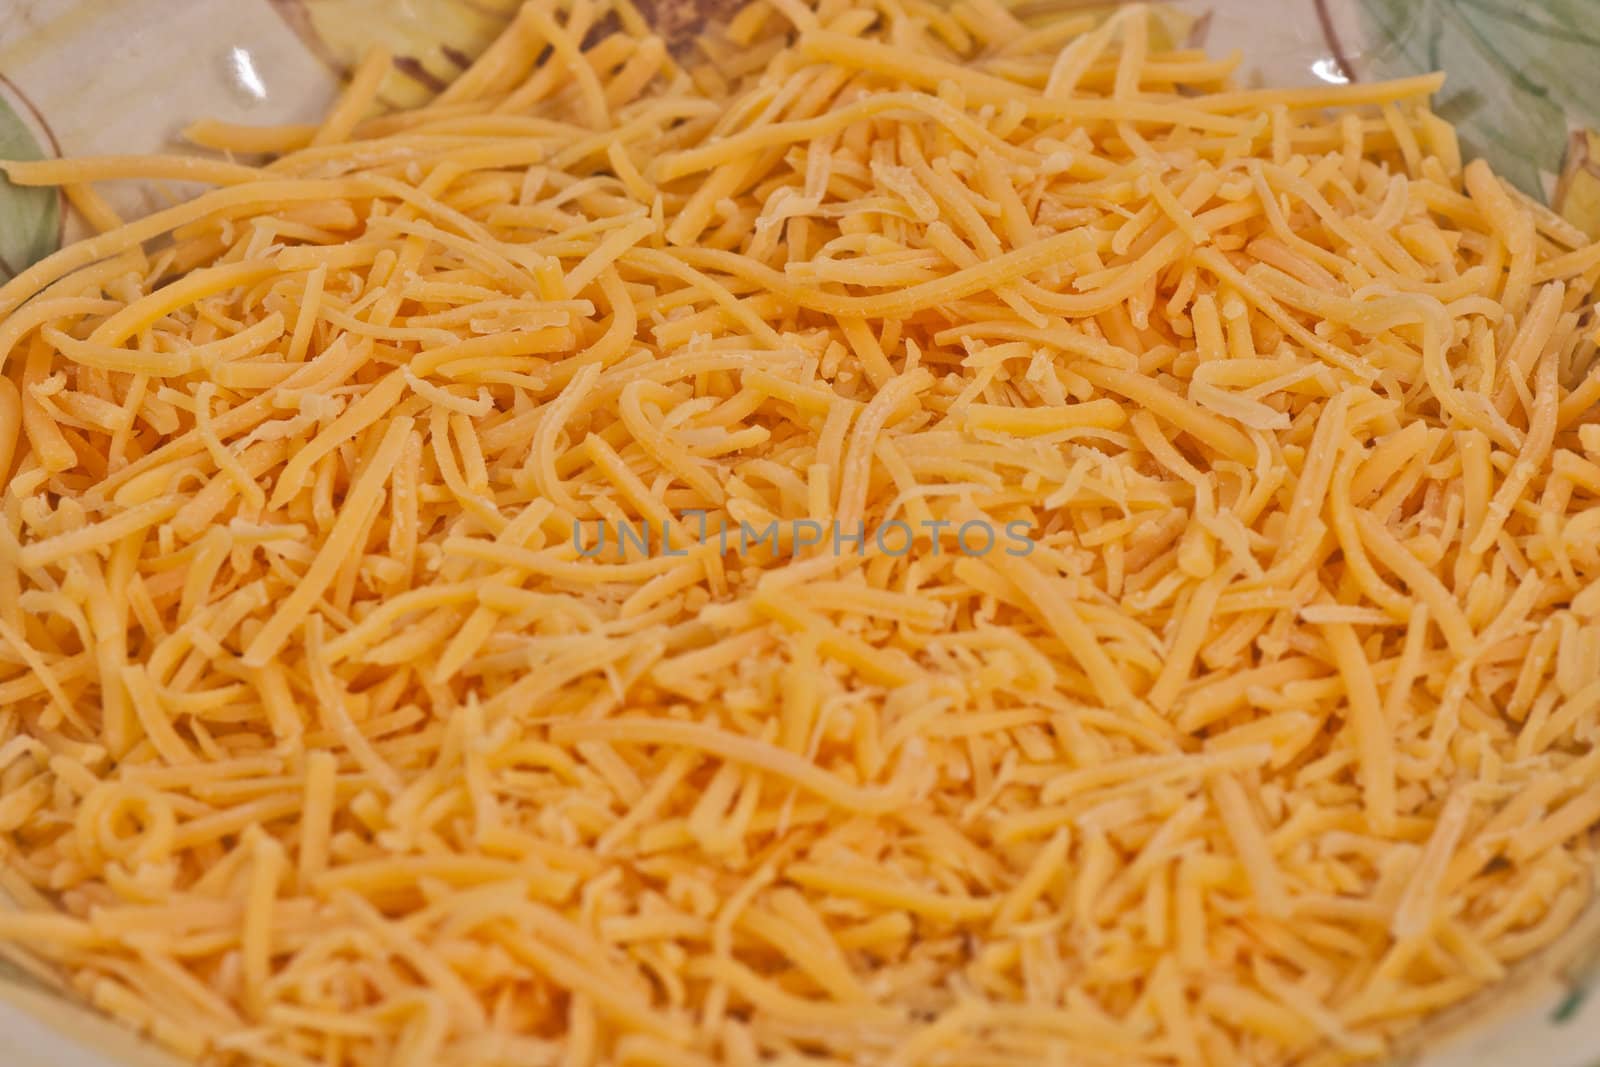 Plate of chedar cheese shredded in apile.